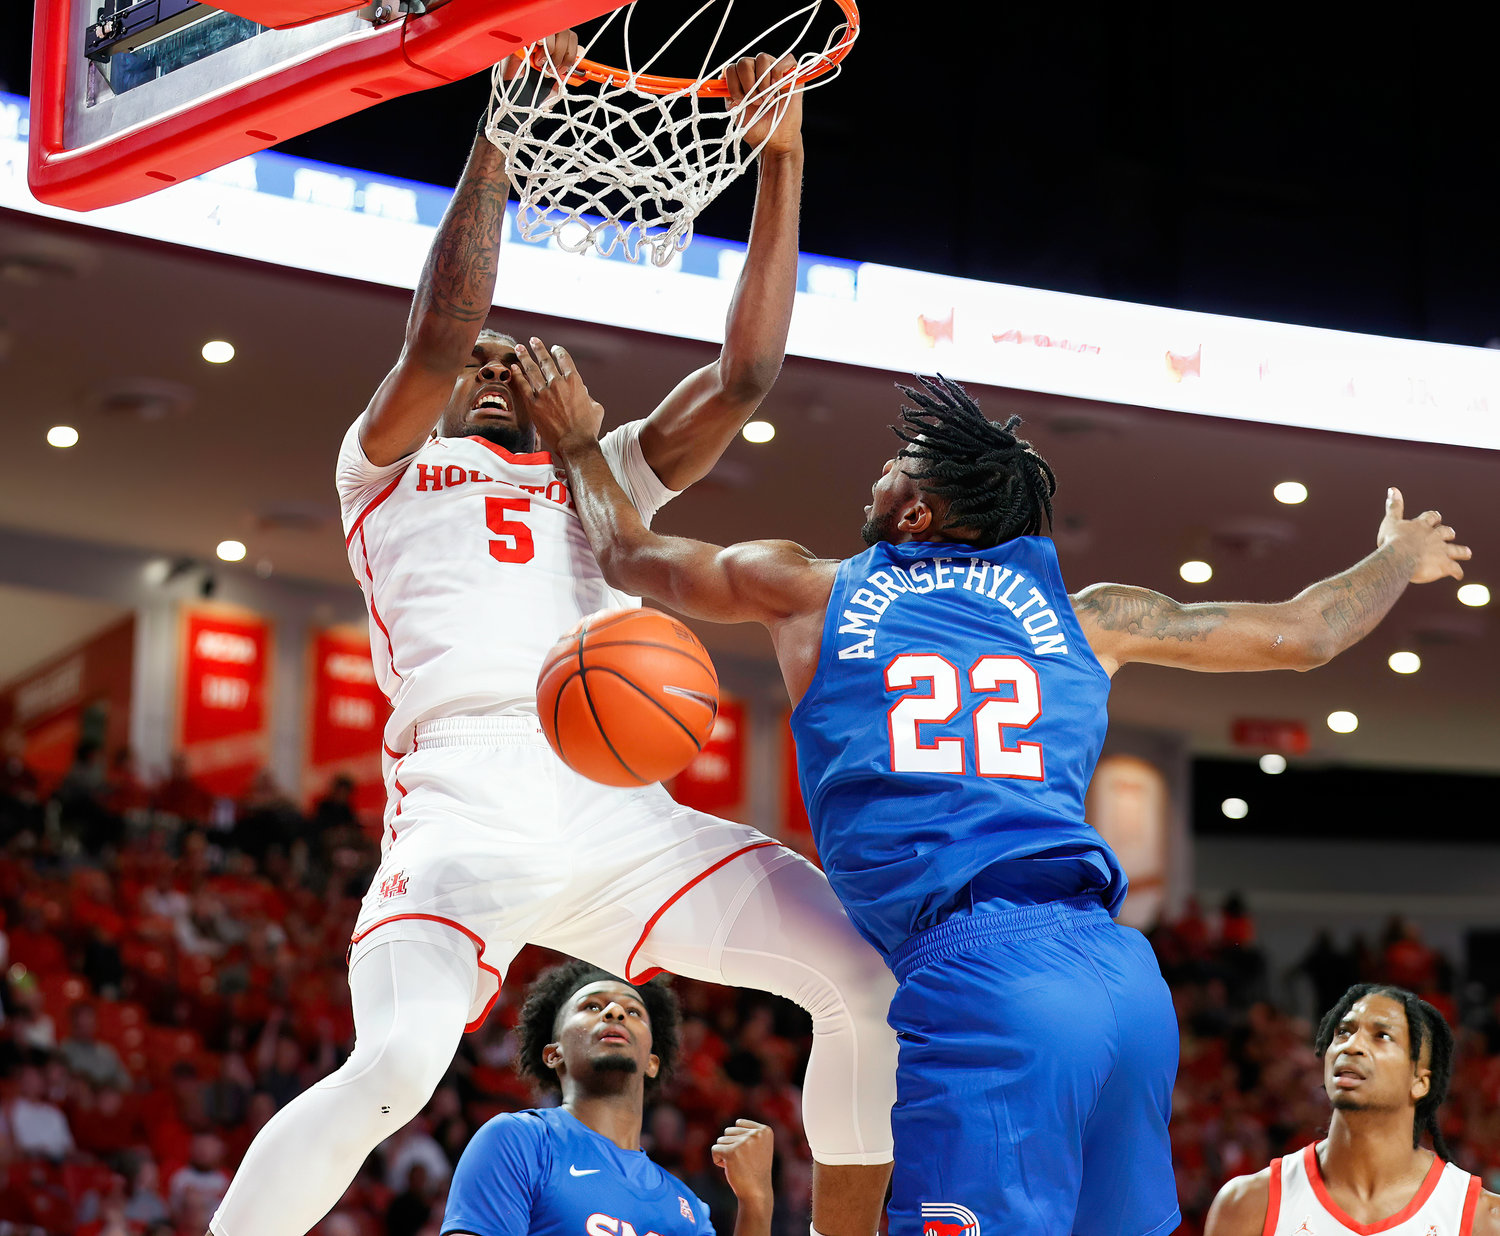 Houston forward Ja'Vier Francis (5) dunks the ball during an NCAA men’s basketball game between the Houston Cougars and the Southern Methodist Mustangs on Jan. 5, 2023 in Houston. Houston won, 87-53,